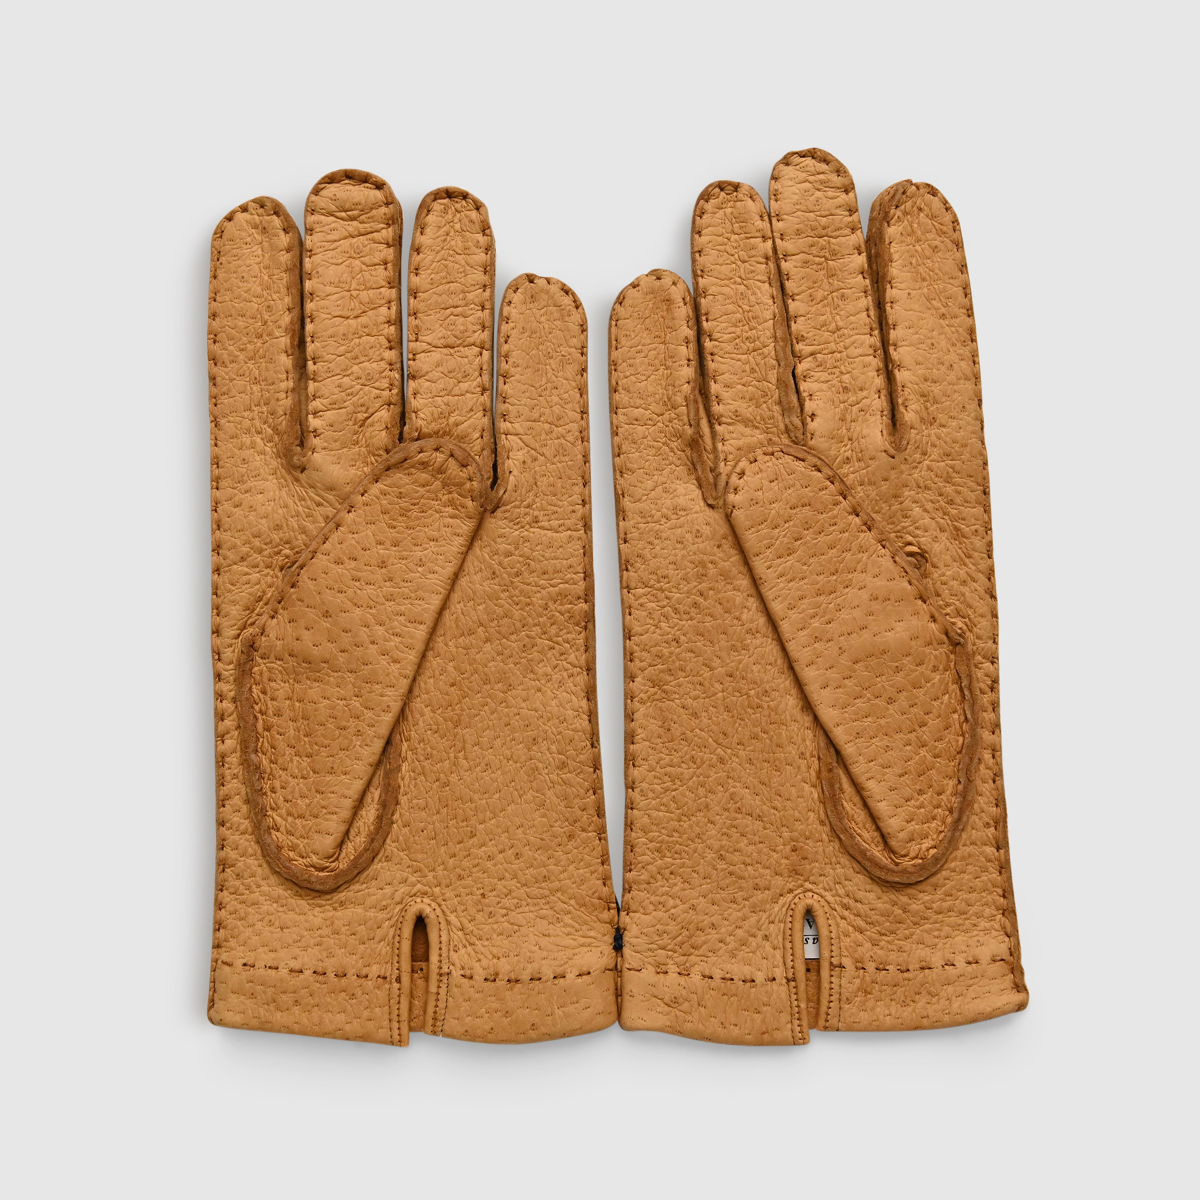 Omega Unlined Peccary Leather Glove Omega SRL on sale 2022 2